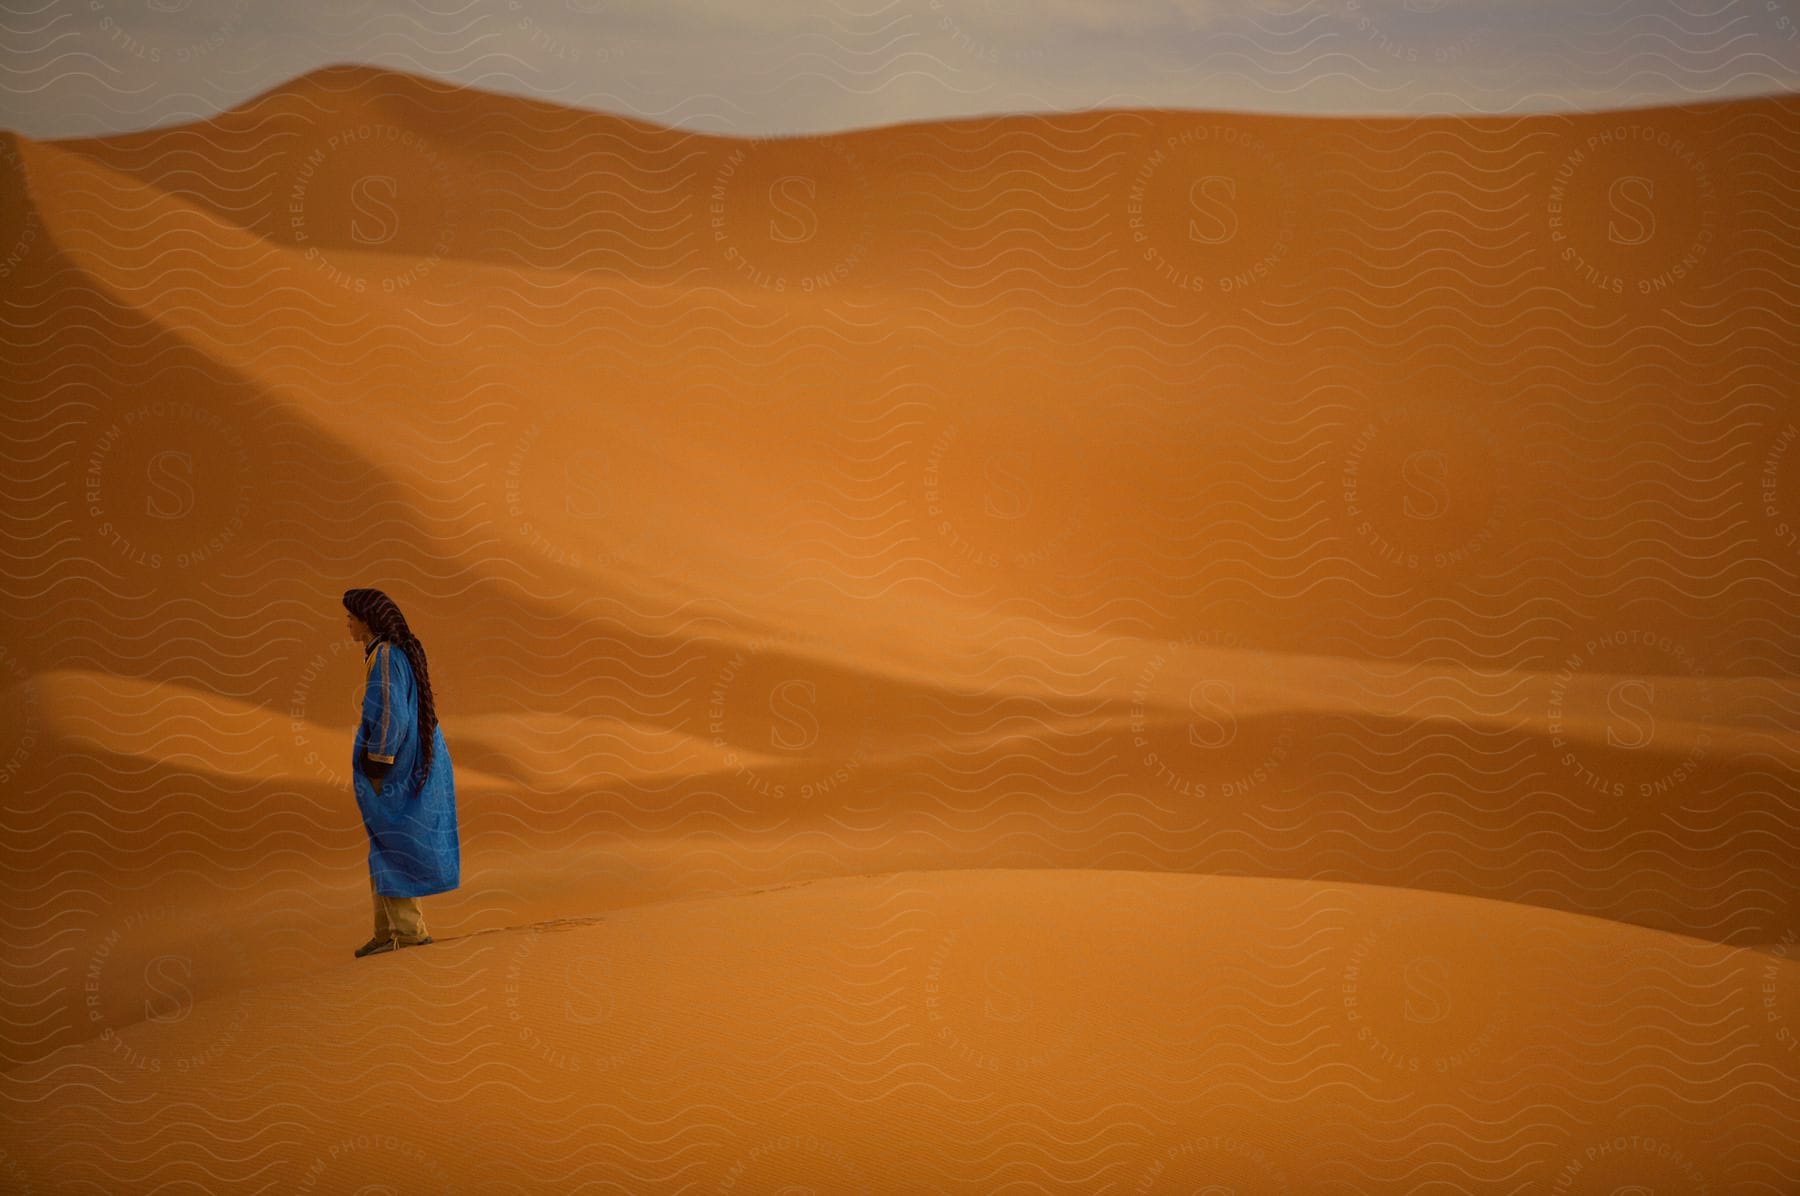 Man standing on yellow sand in the desert wearing a blue overcoat